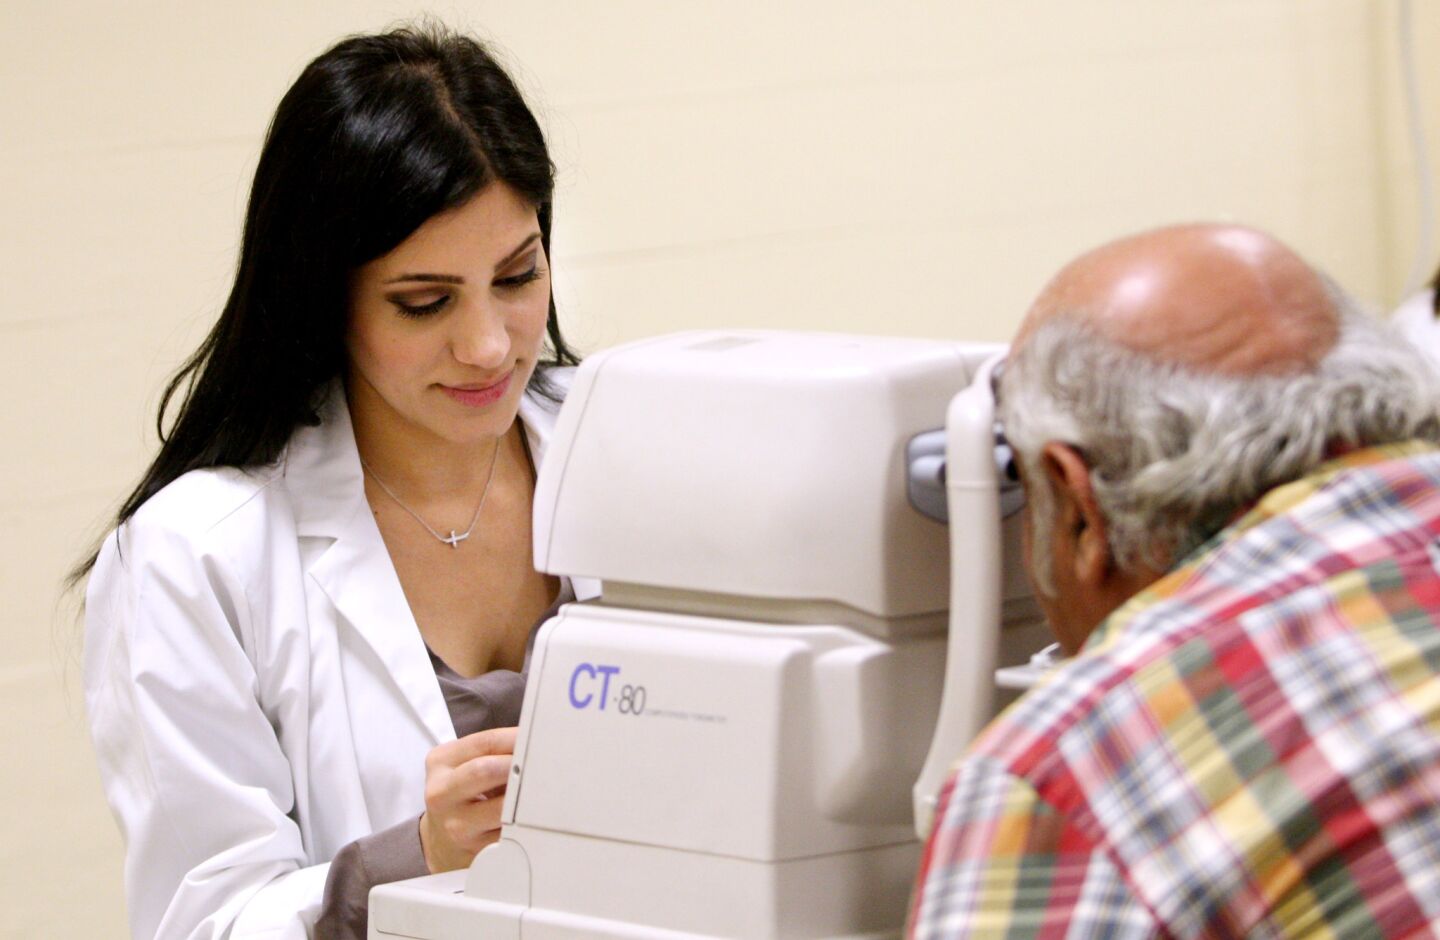 Susie Haroutounian, student at West Coast University, gives a glaucoma test to an attendee at the Sixth Annual Glendale Health Festival at the Glendale Civic Auditorium in Glendale on Saturday, November 7, 2015.